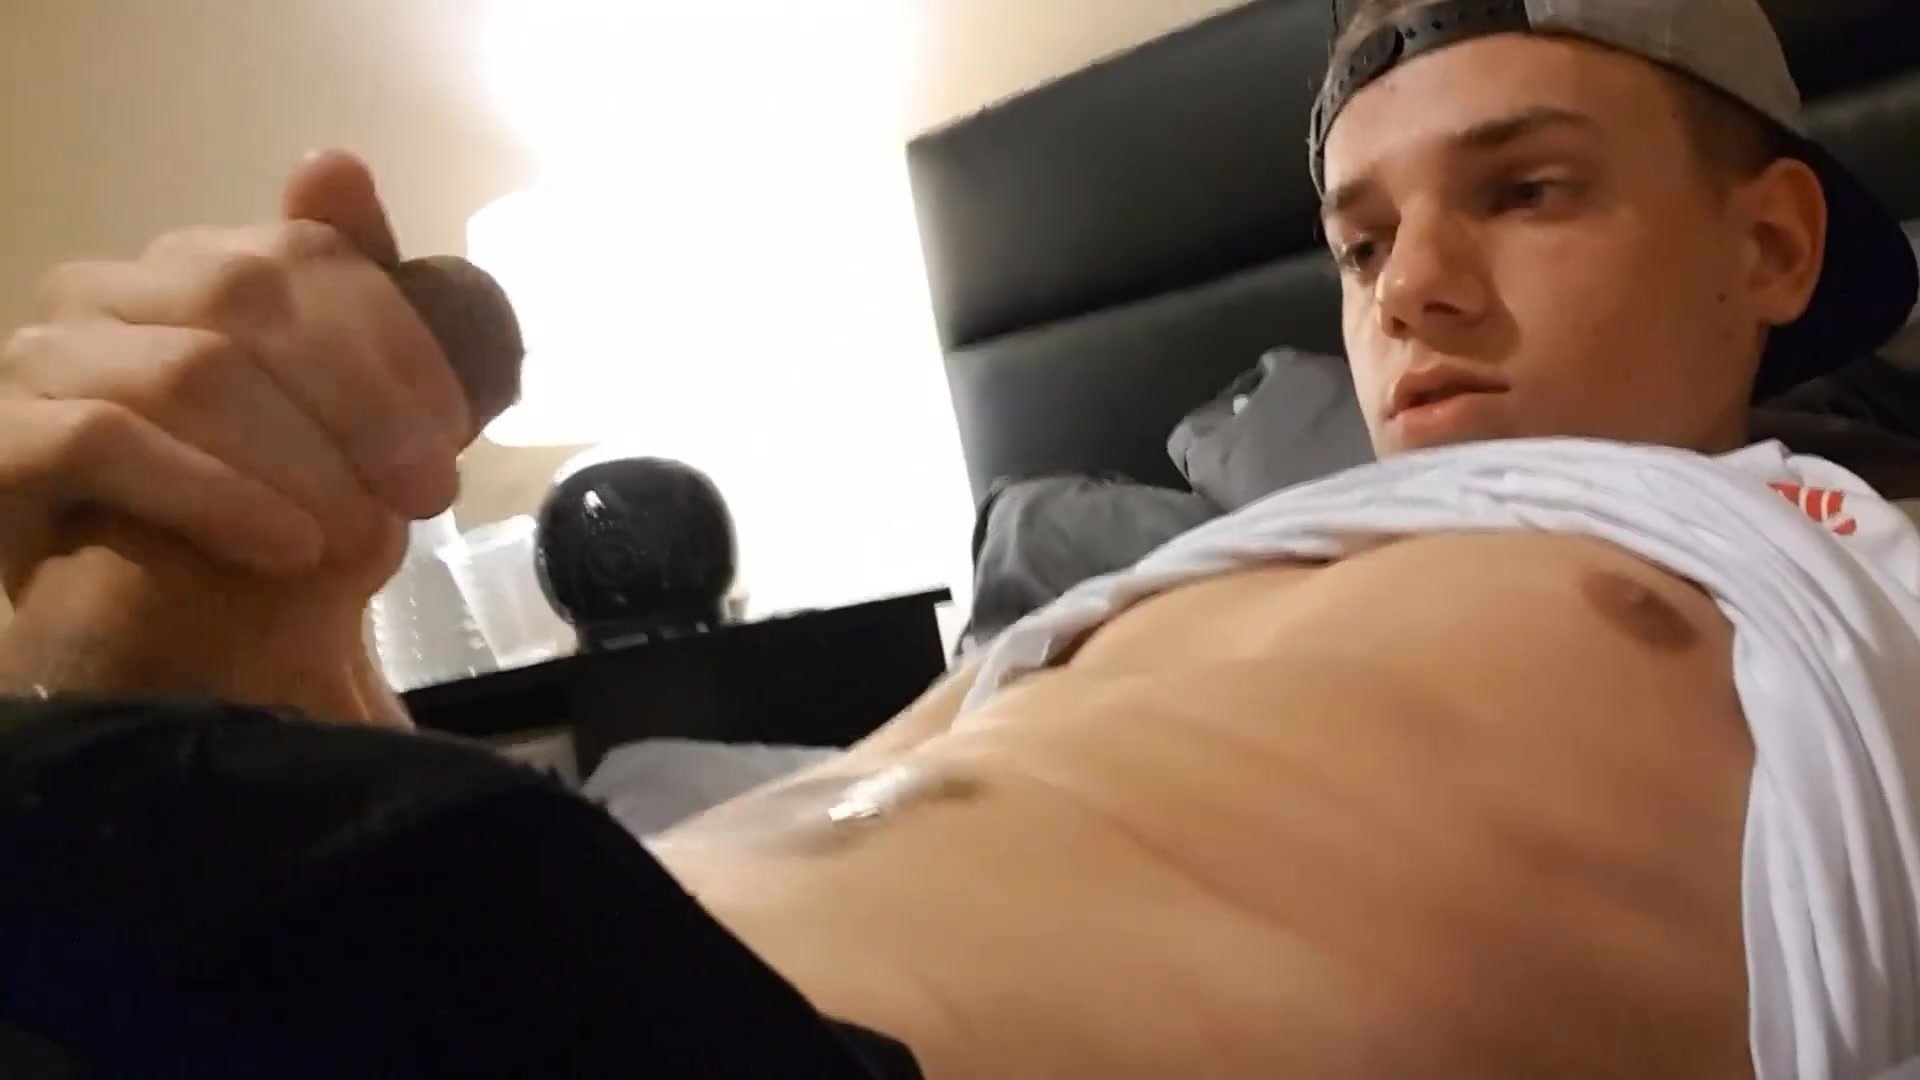 Hot Aussie Guy Cums All Over His Stomach